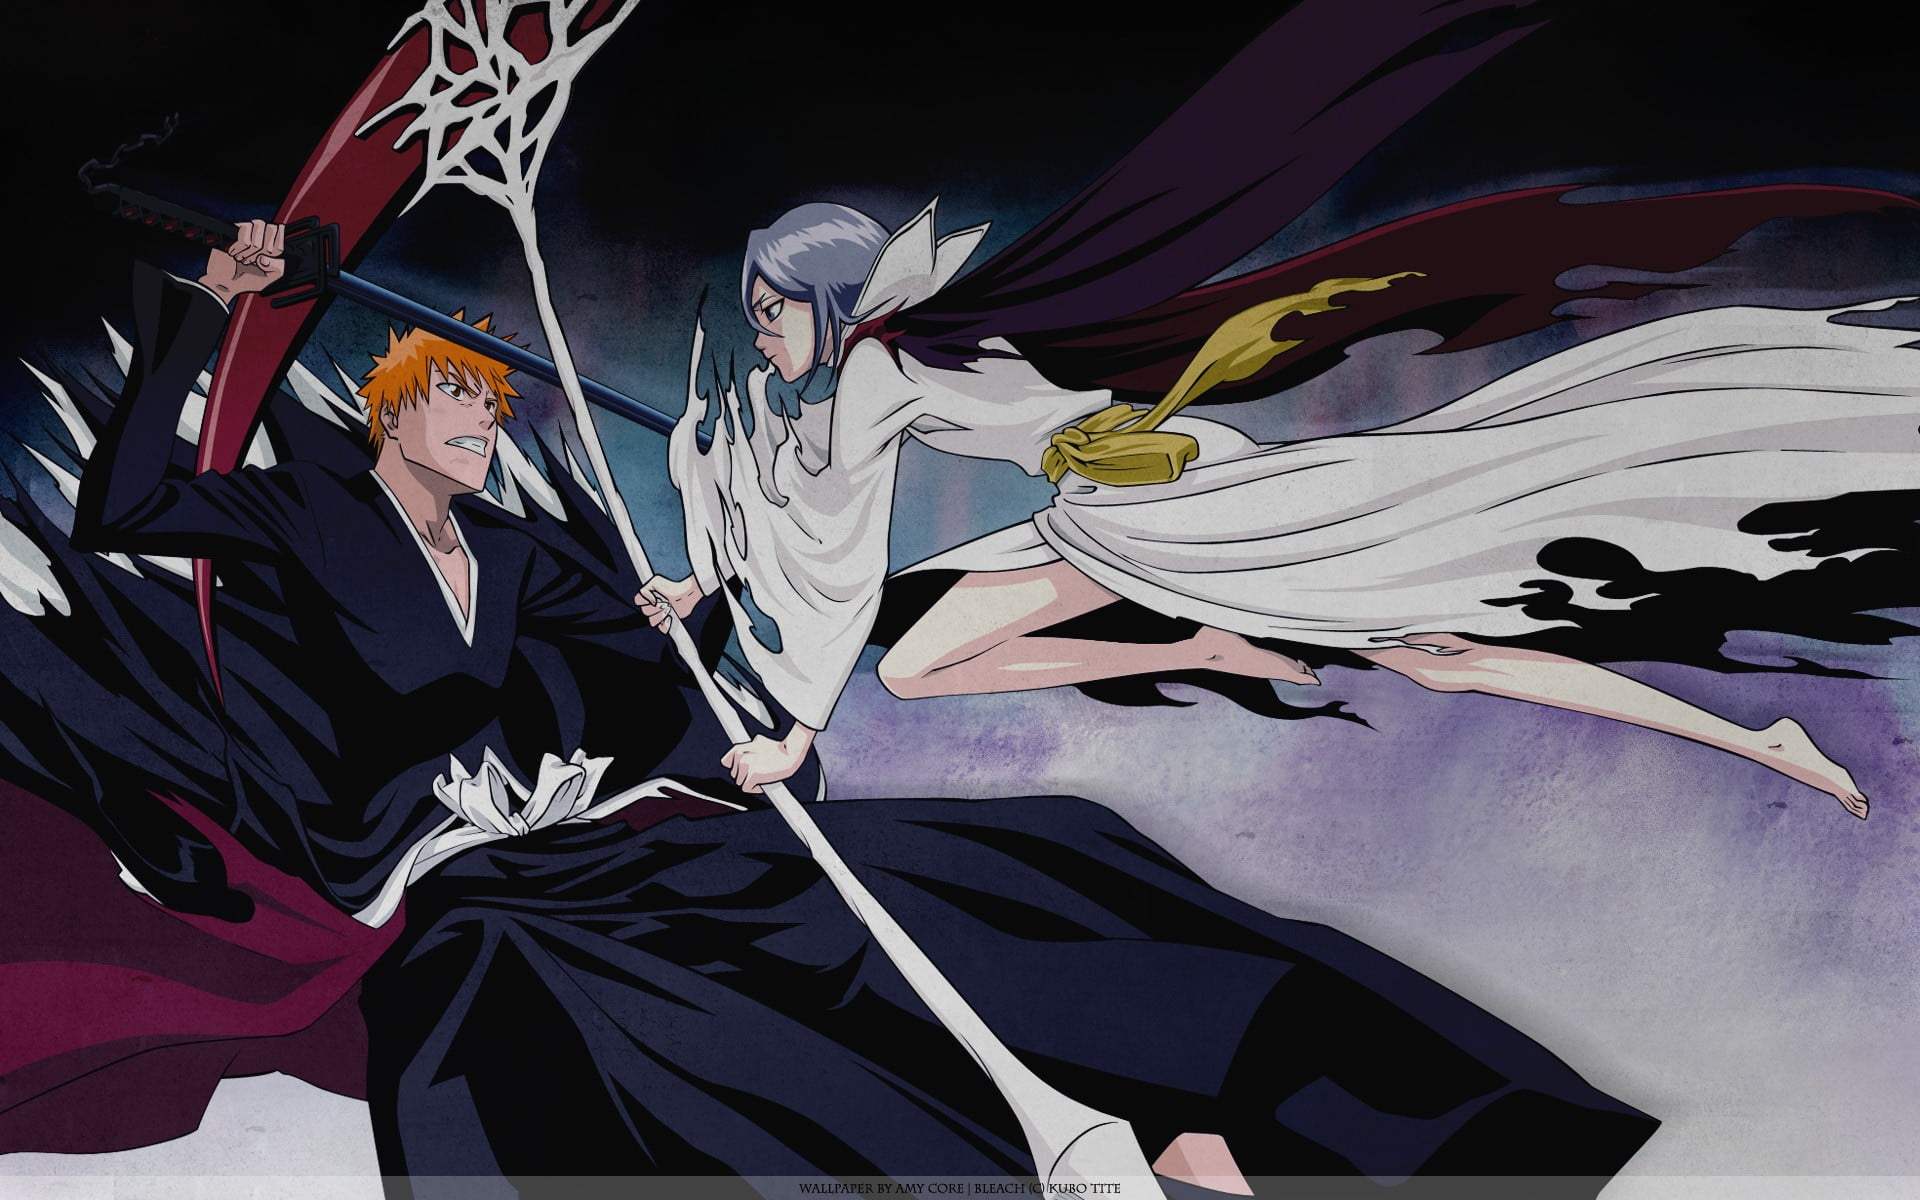 Bleach Sequel Anime On The Way of Geek